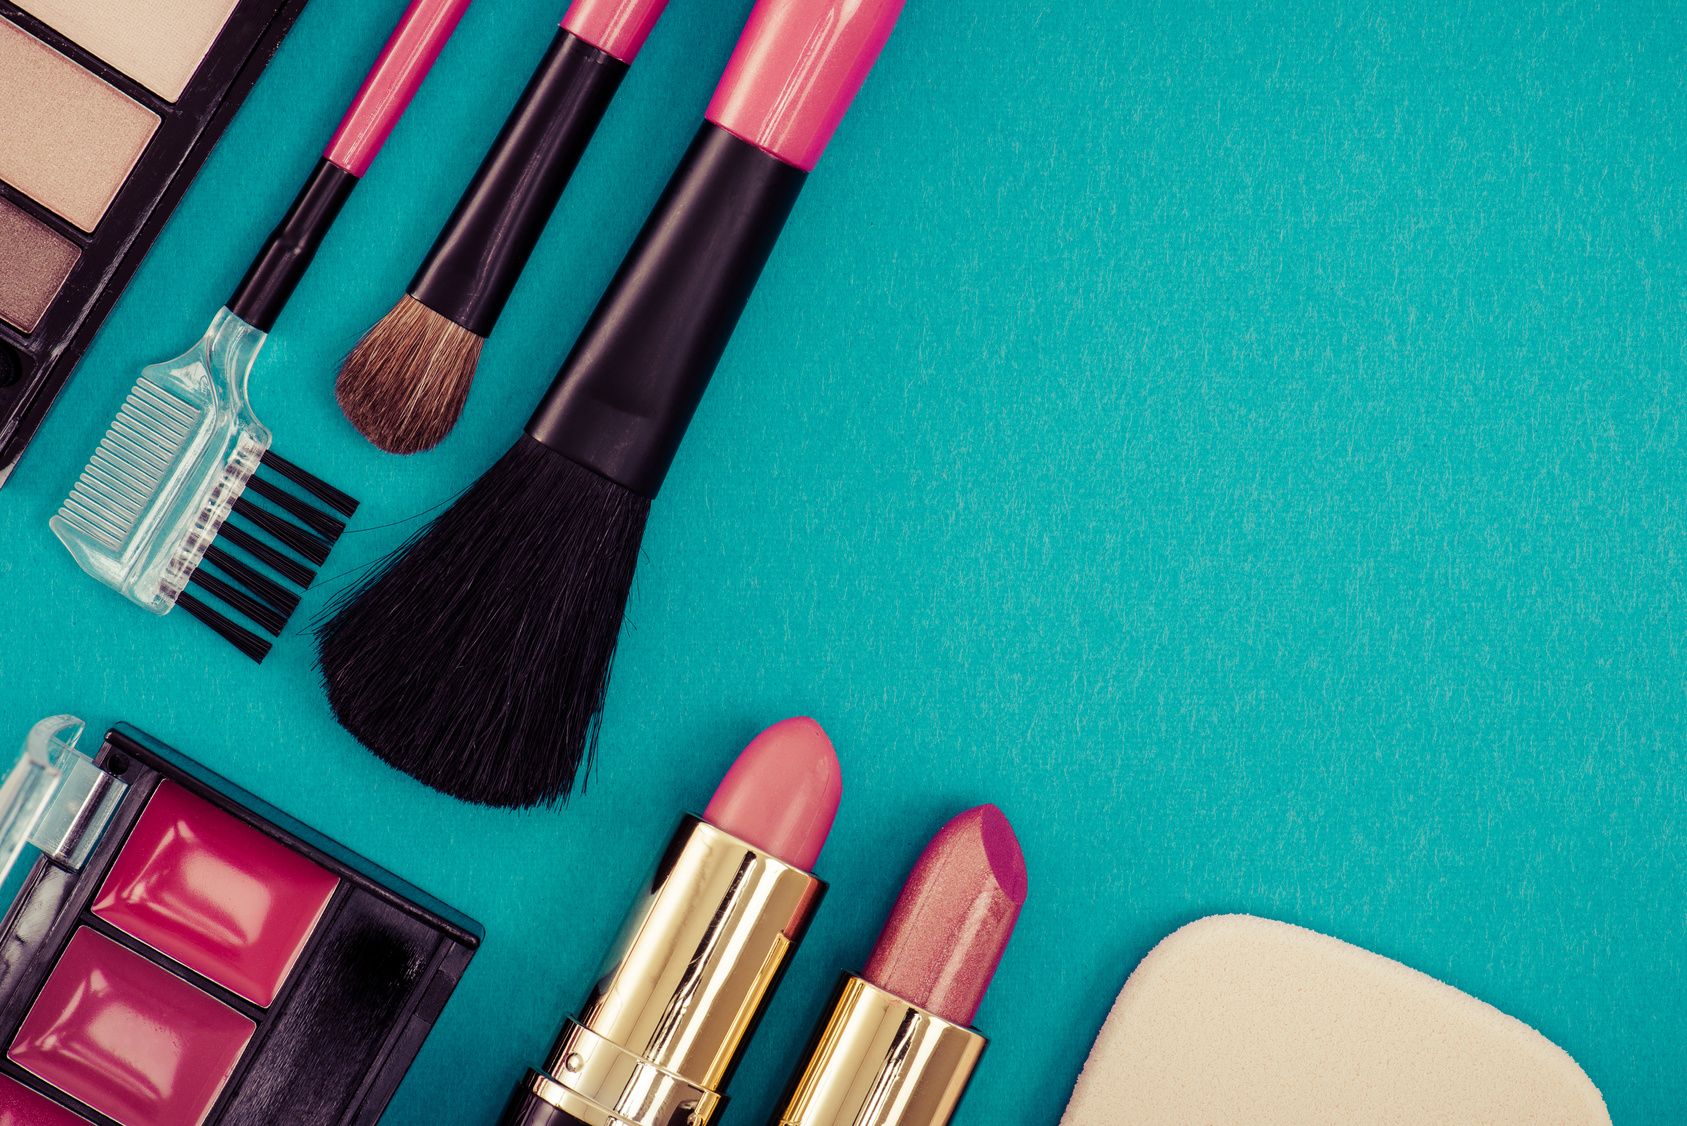 Try These Top 10 Makeup Brush Sets with promo codes and coupons